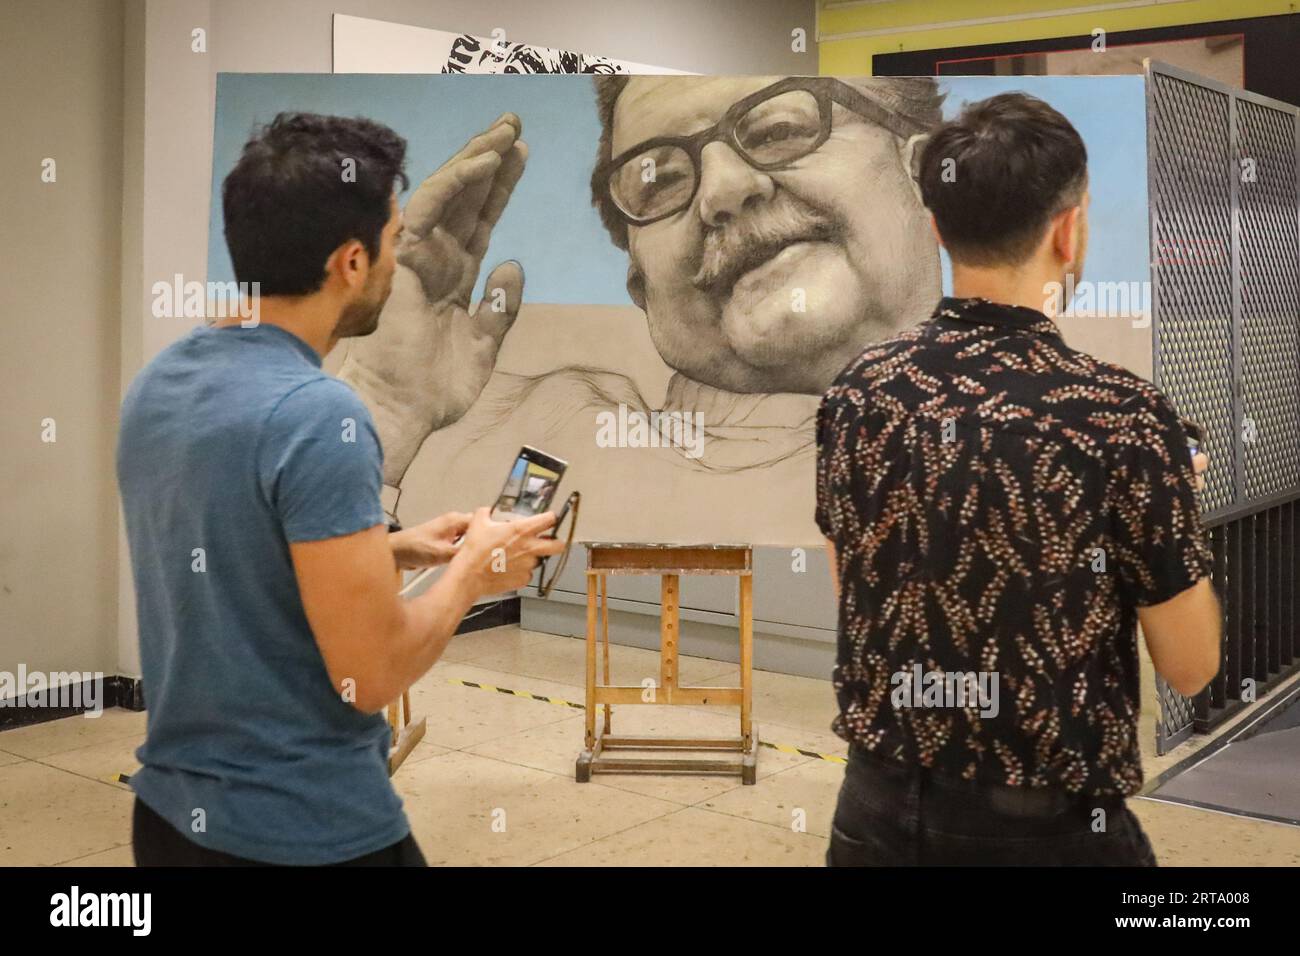 Madrid, Spain. 11th Sep, 2023. Two people look at a portrait of Salvador Allende at the entrance to the commemoration event for the 50th anniversary of the coup d'état in Chile. On the occasion of the 50th anniversary of the 1973 Chilean coup d'état by Augusto Pinochet against President Salvador Allende, an event is held at the headquarters of the Workers' Commissions (CCOO) in Madrid. (Photo by David Canales/SOPA Images/Sipa USA) Credit: Sipa USA/Alamy Live News Stock Photo